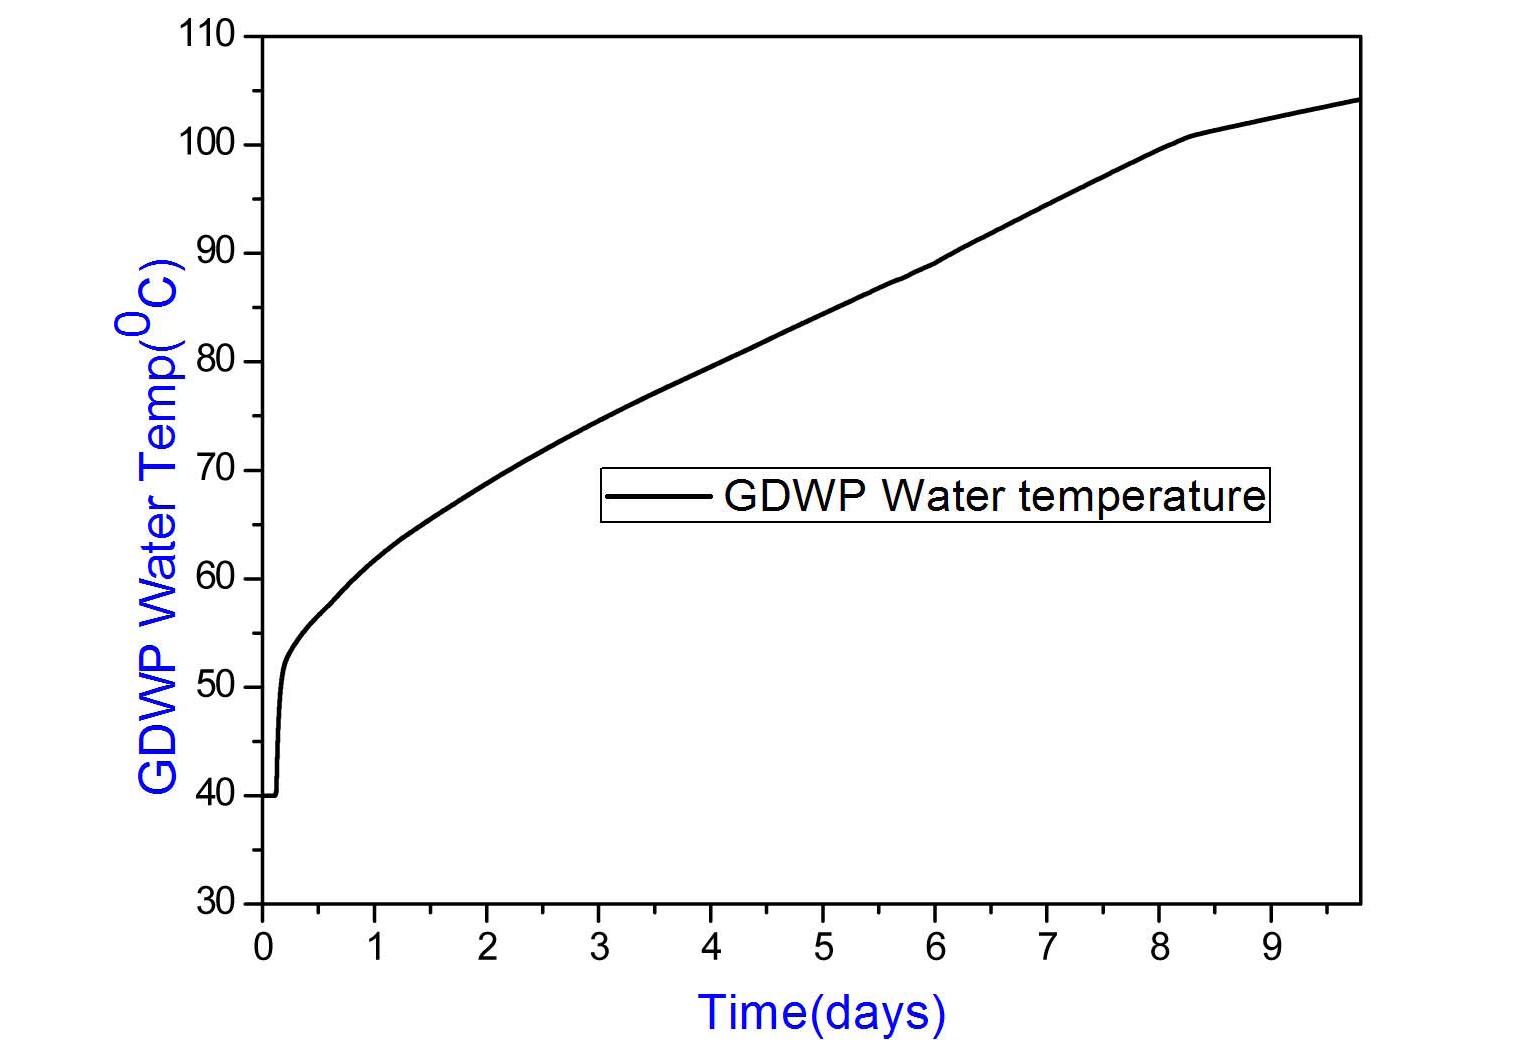 Variation of GDWP Water Temperature